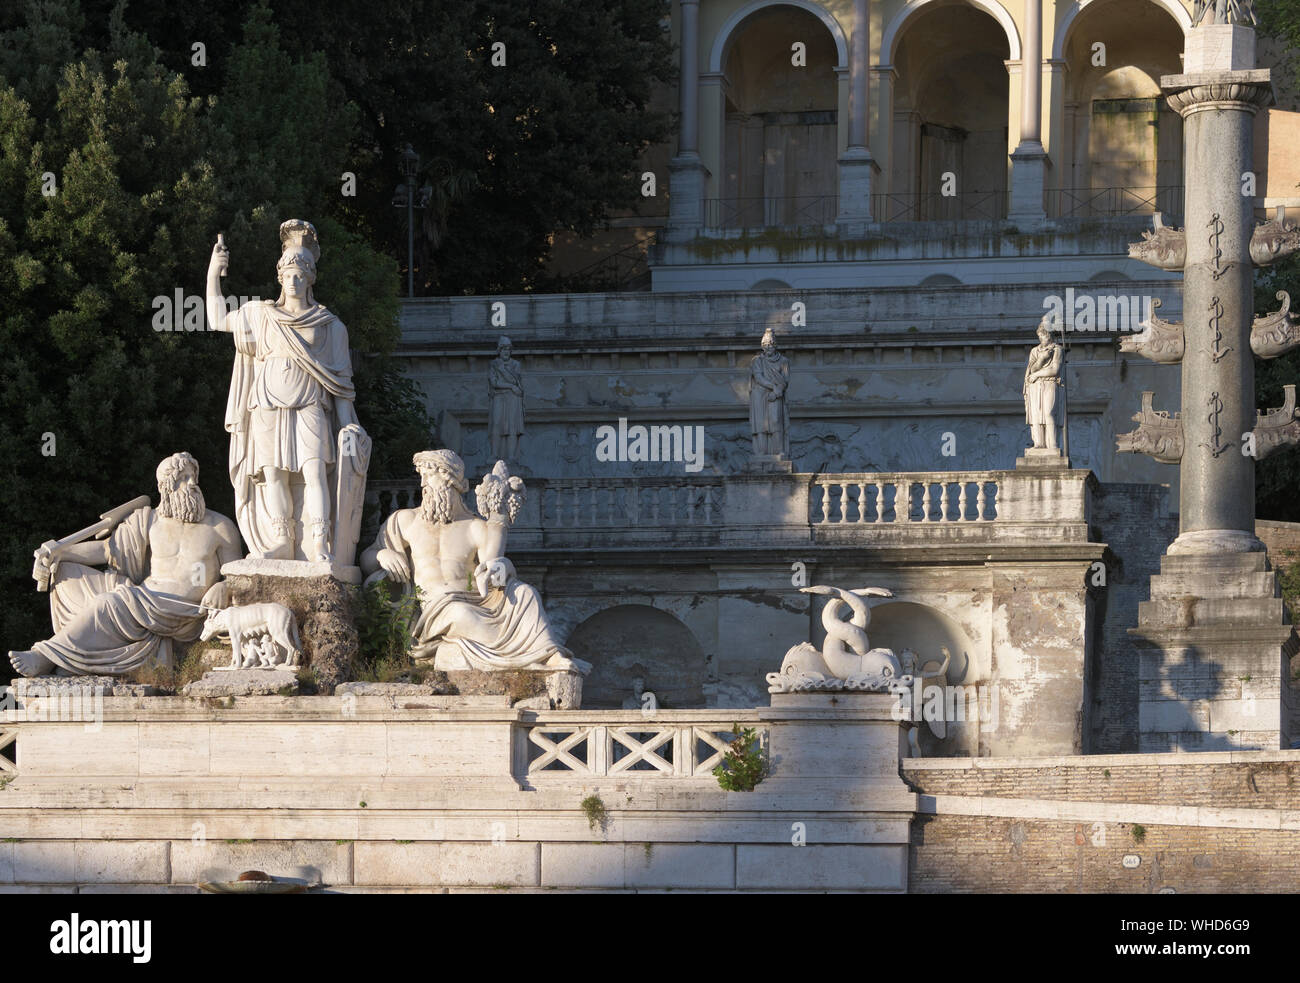 Fountain of the goddess of Rome, Rome, Italy. Eastern side of Popolo square Stock Photo